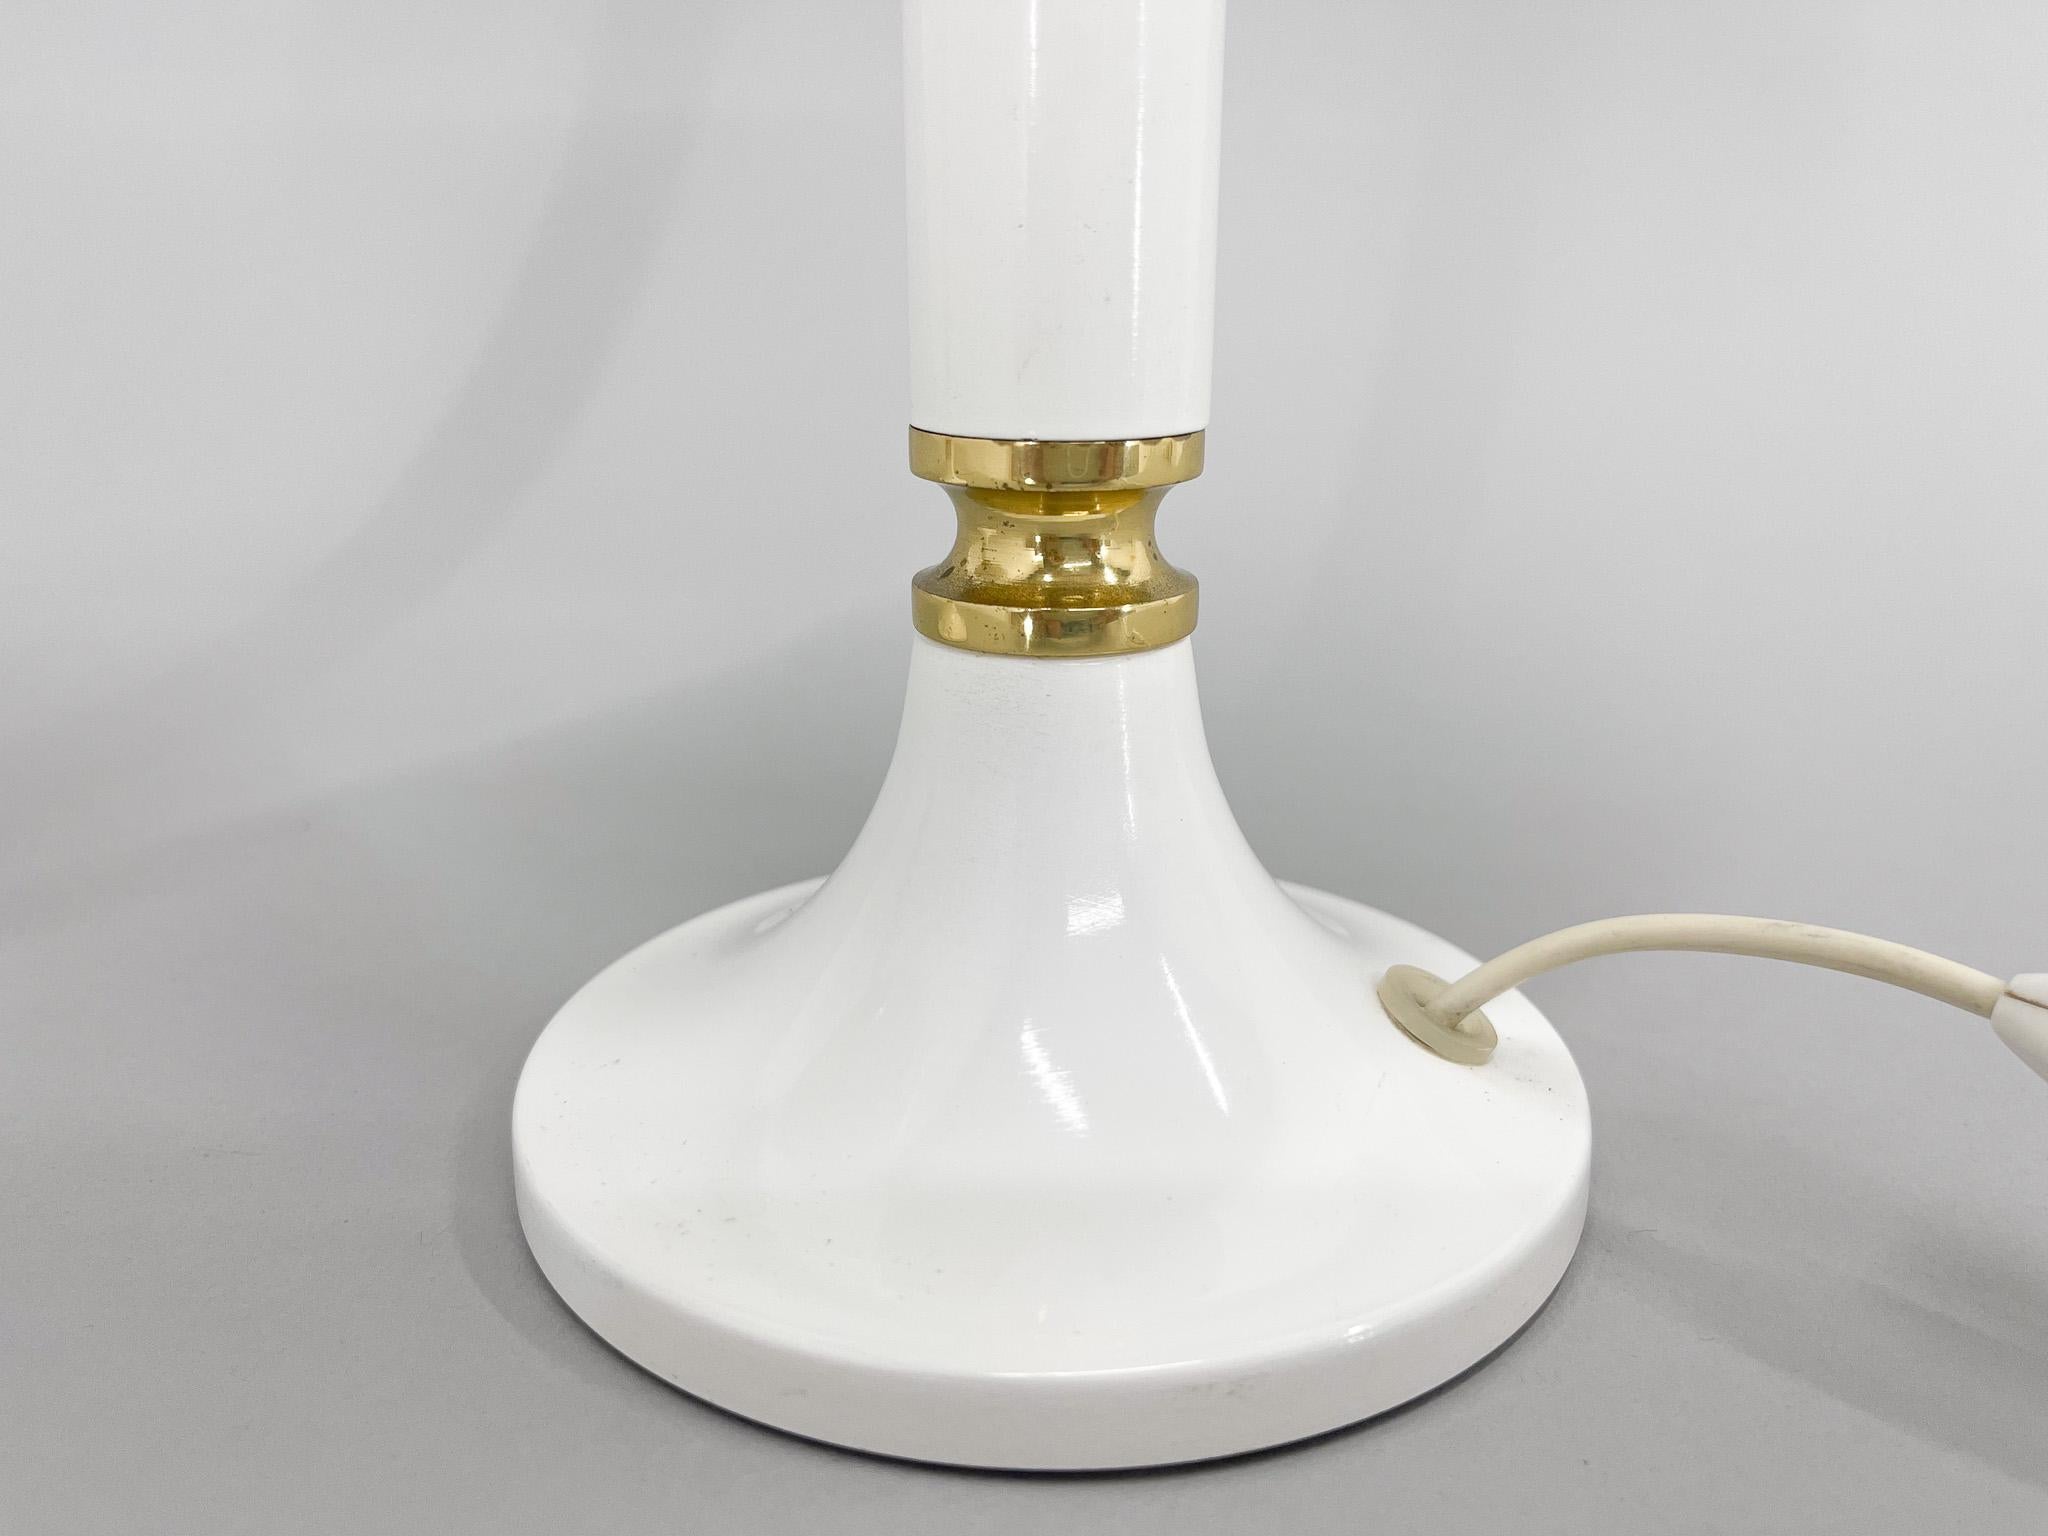 Pair of Mid-century Opaline Glass & Brass Table Lamps by Drukov, Czechoslovakia For Sale 5